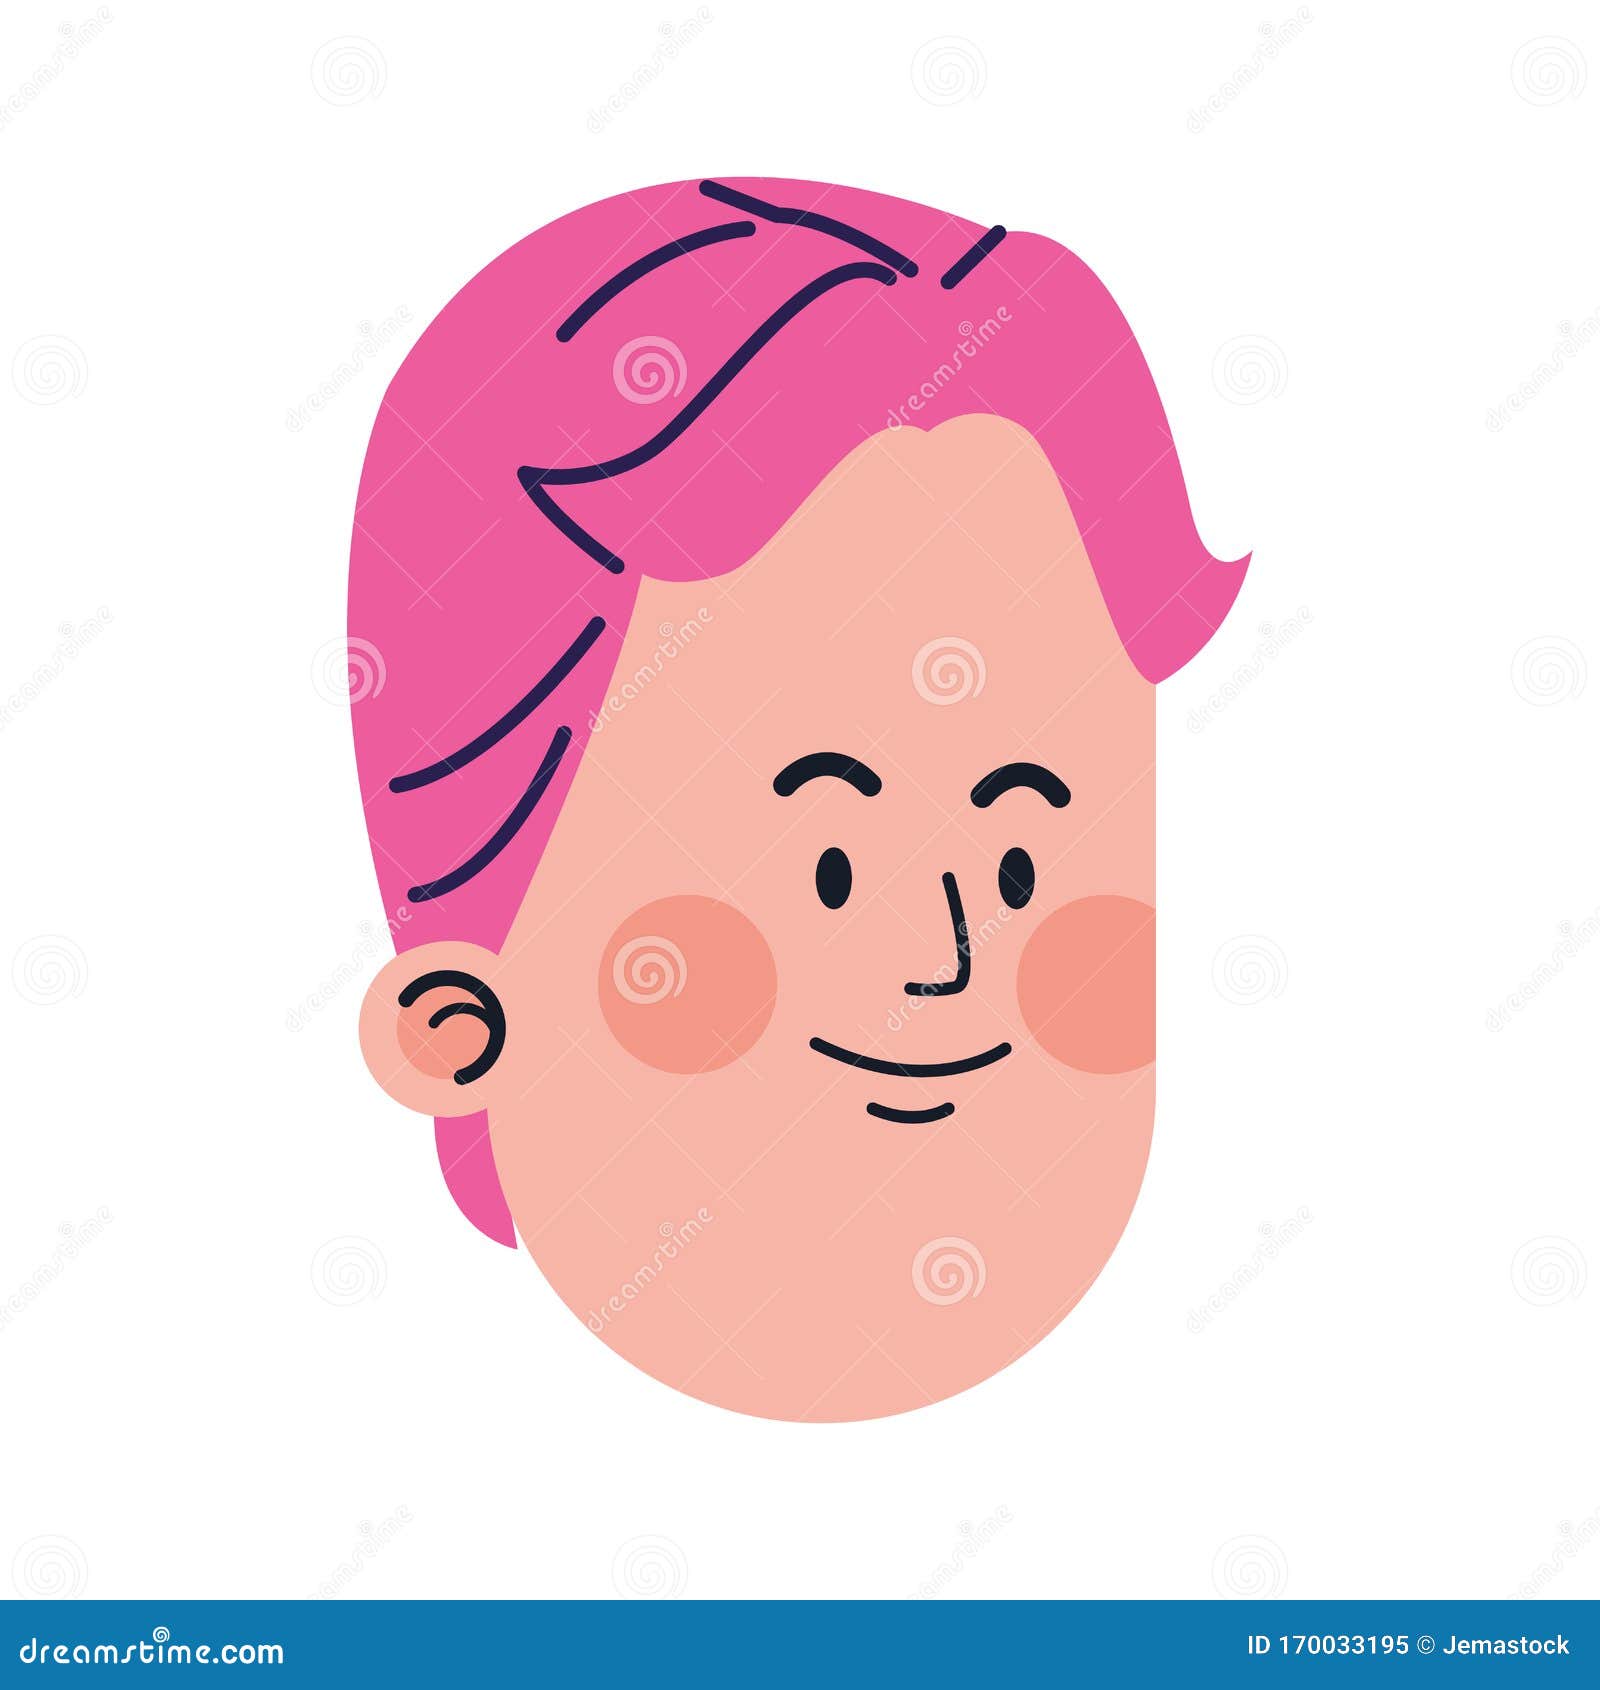 Cartoon boy with pink hair stock vector. Illustration of confident ...